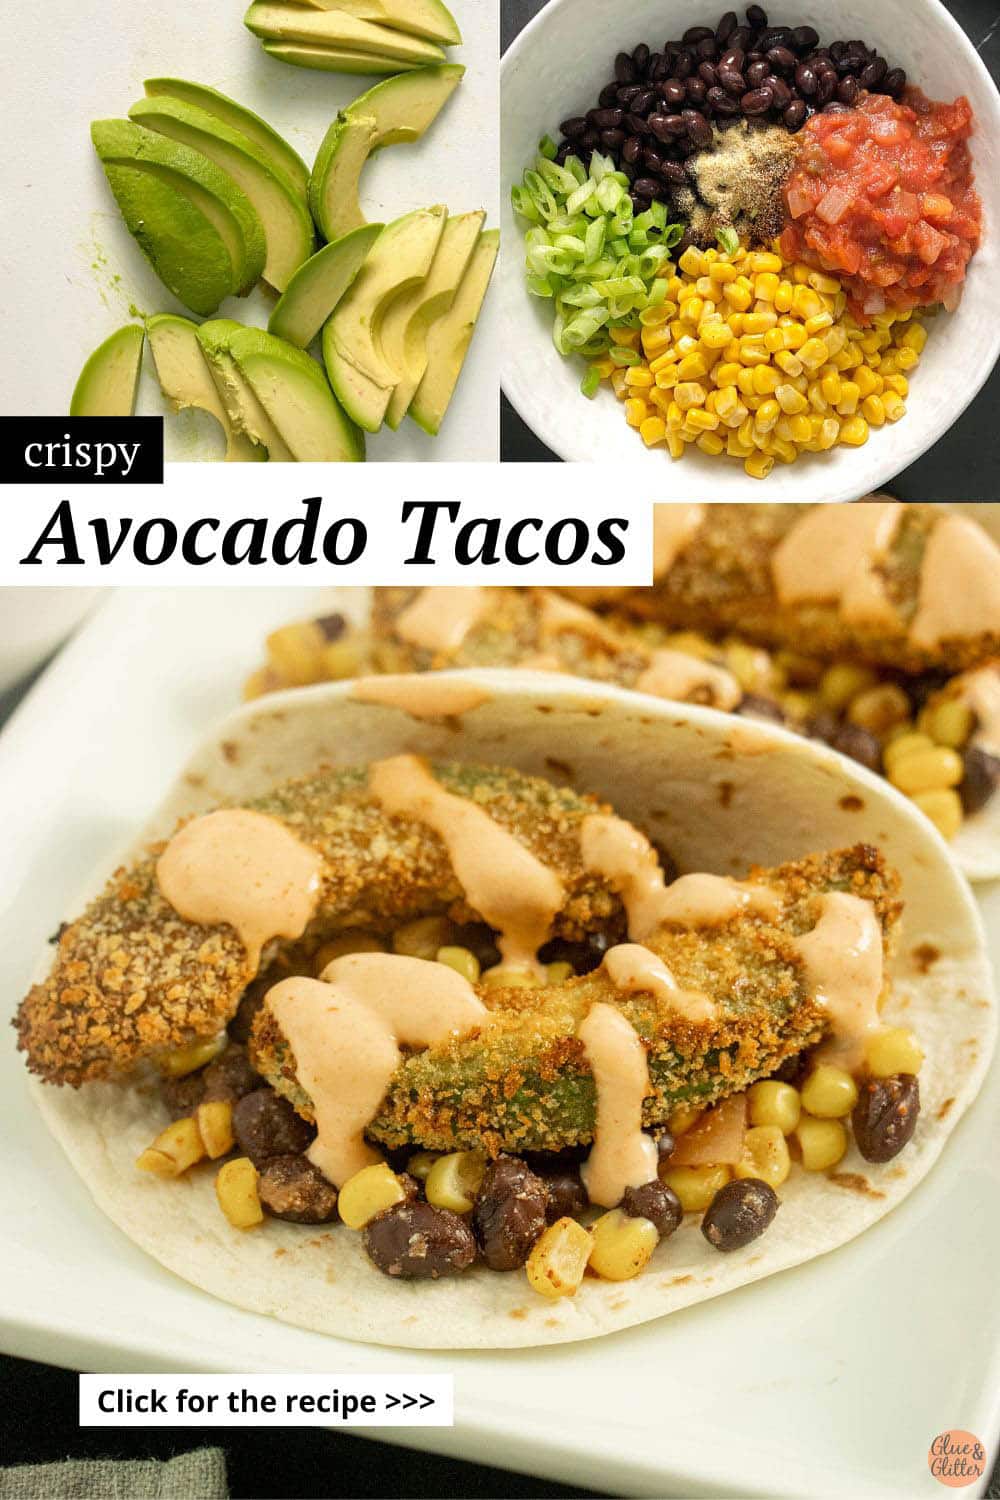 image collage of avocado tacos ingredients and the assembled tacos on a white platter